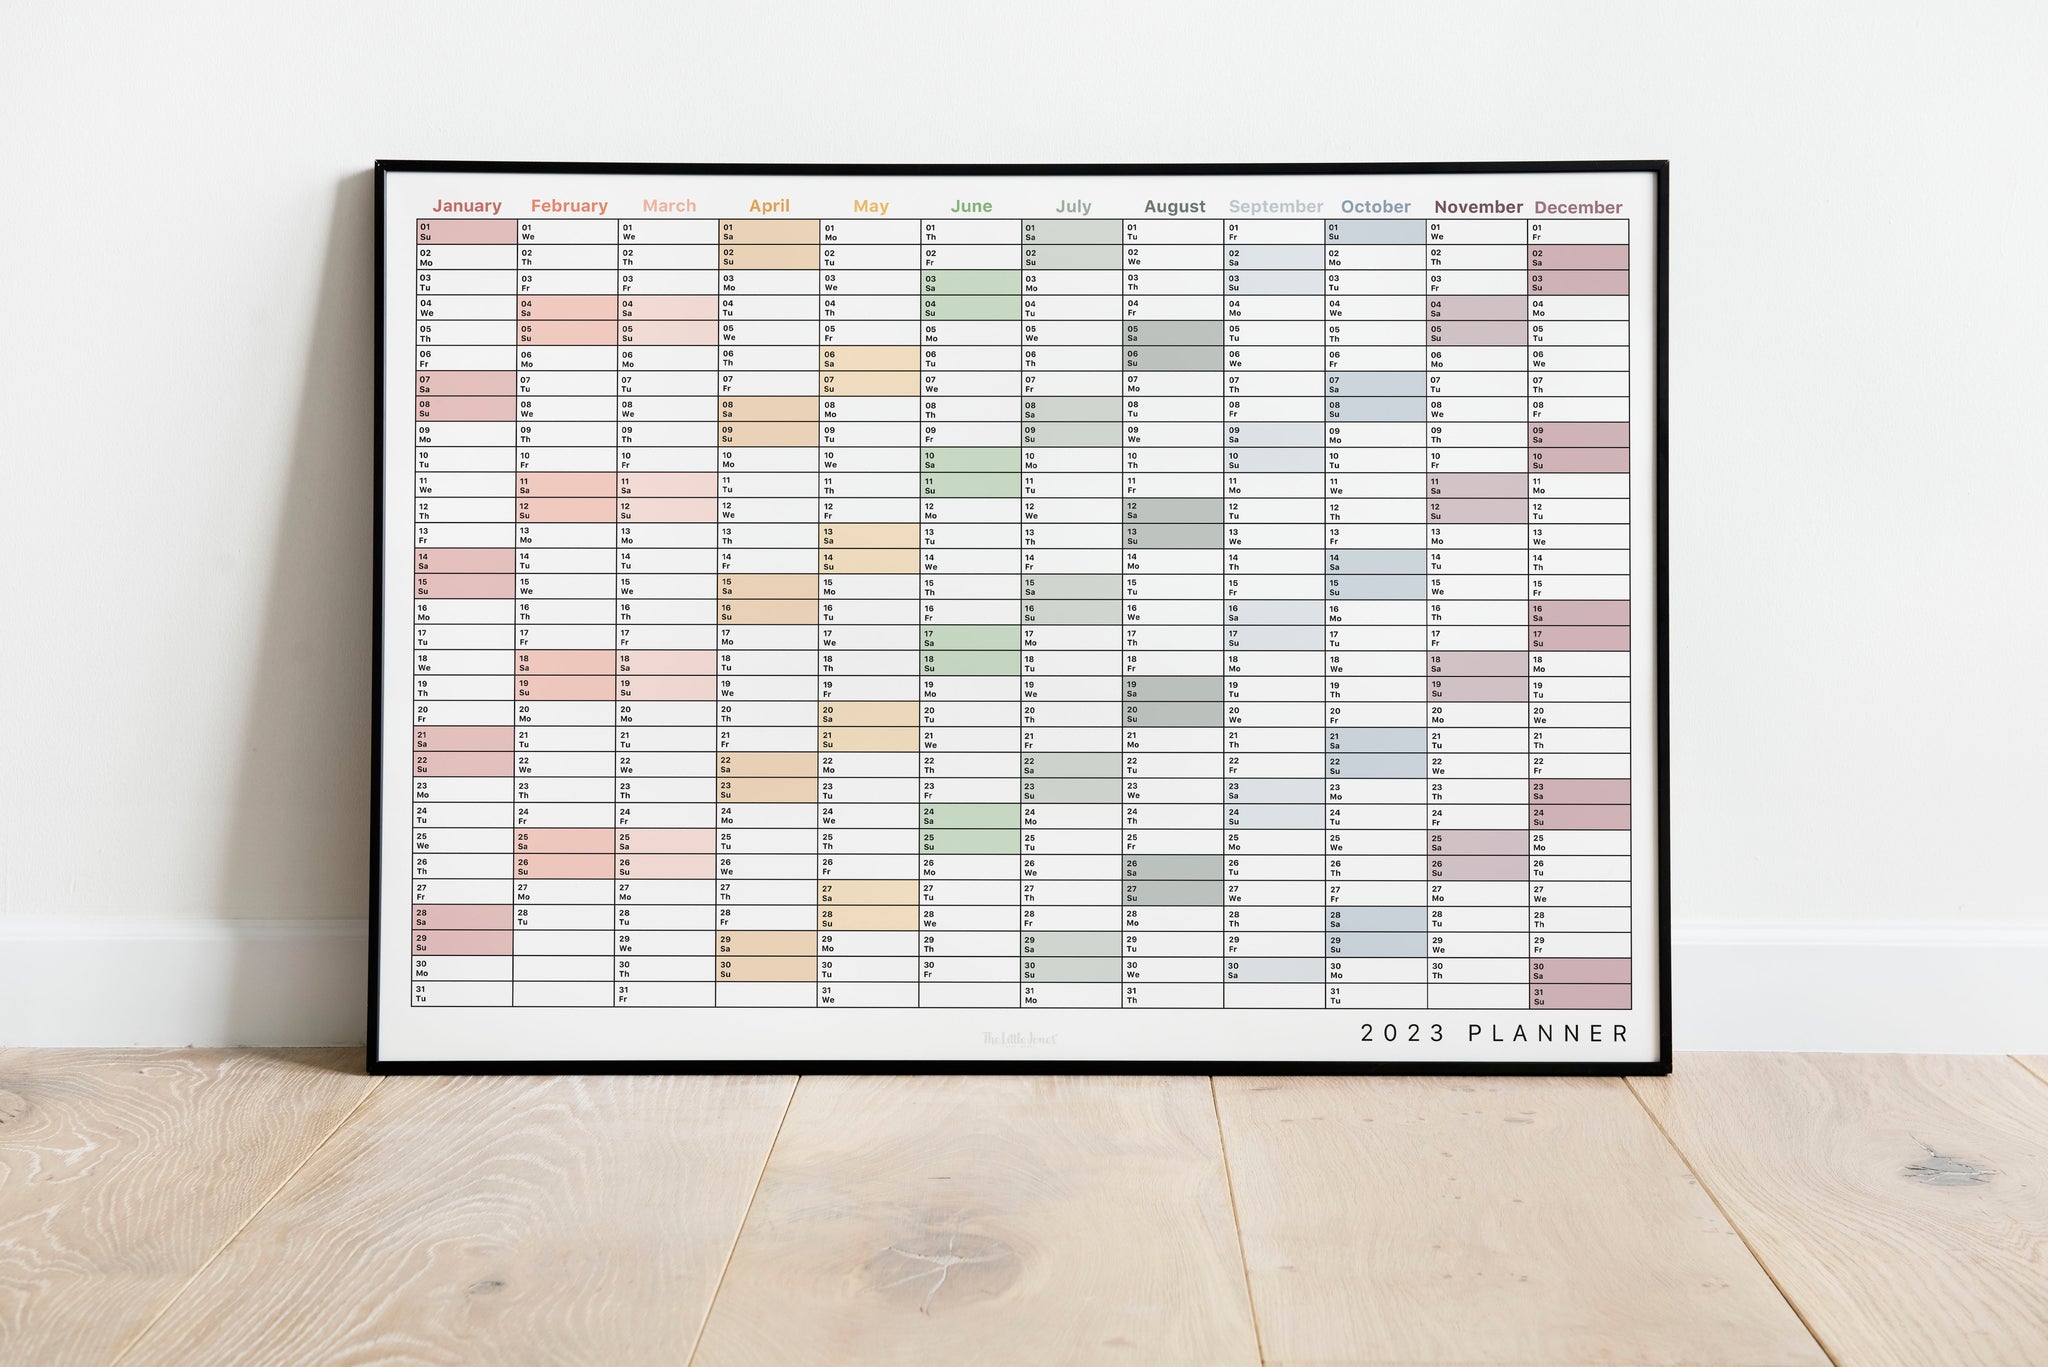 2023 Wall Planner in Landscape - muted tones